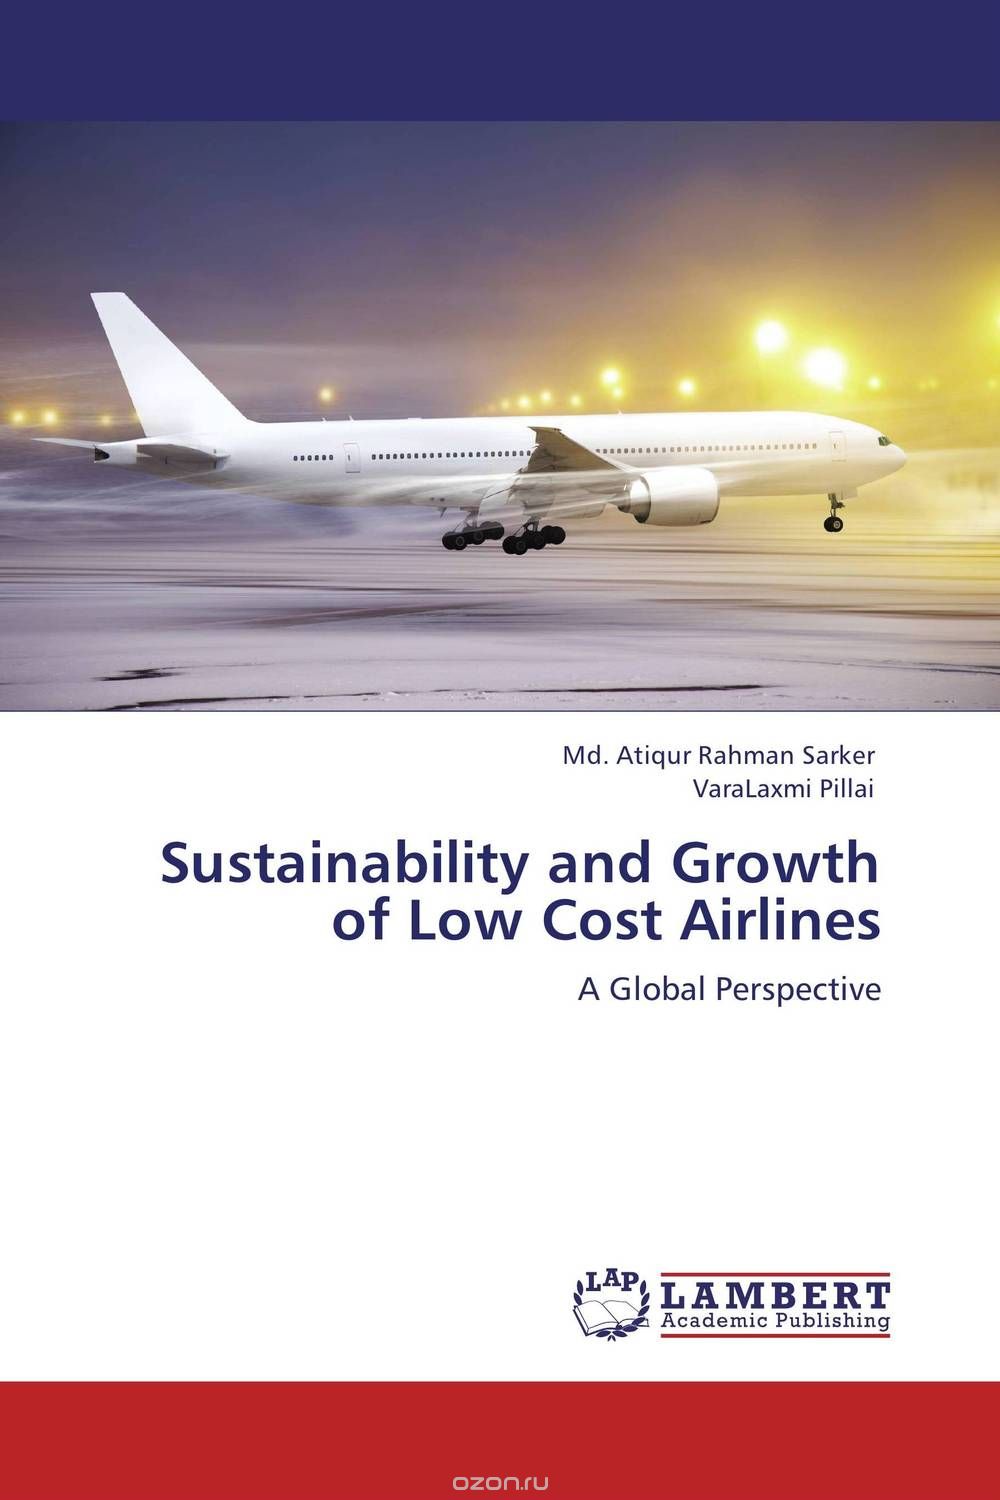 Скачать книгу "Sustainability and Growth of Low Cost Airlines"